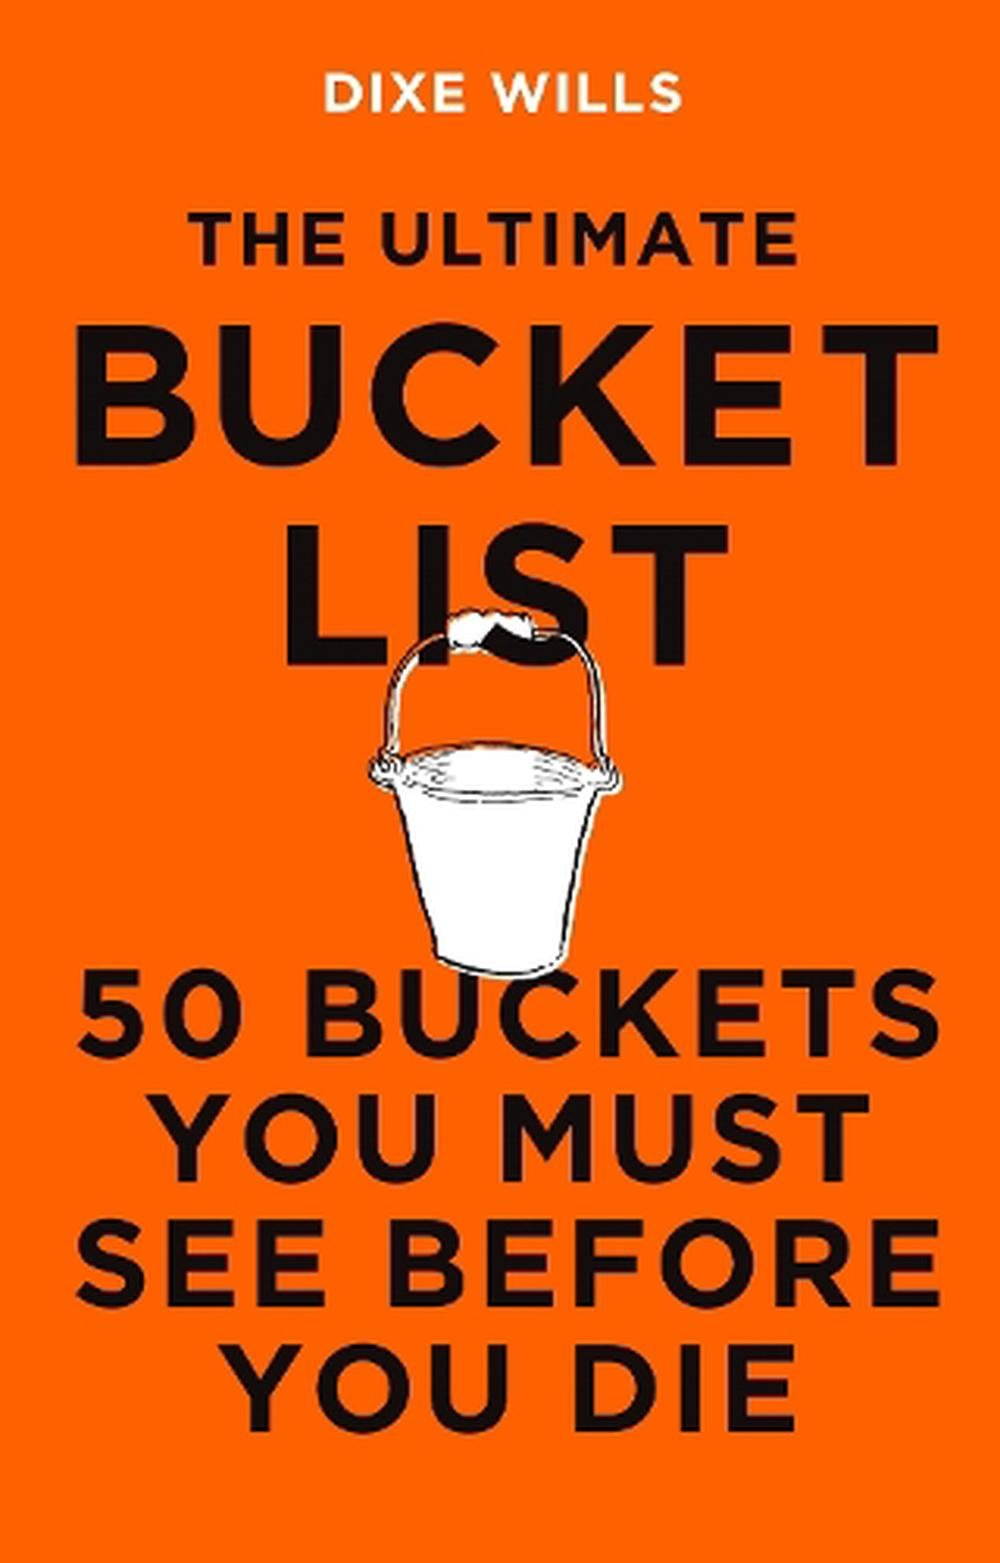 The Ultimate Bucket List - 50 Buckets To See Before You Die